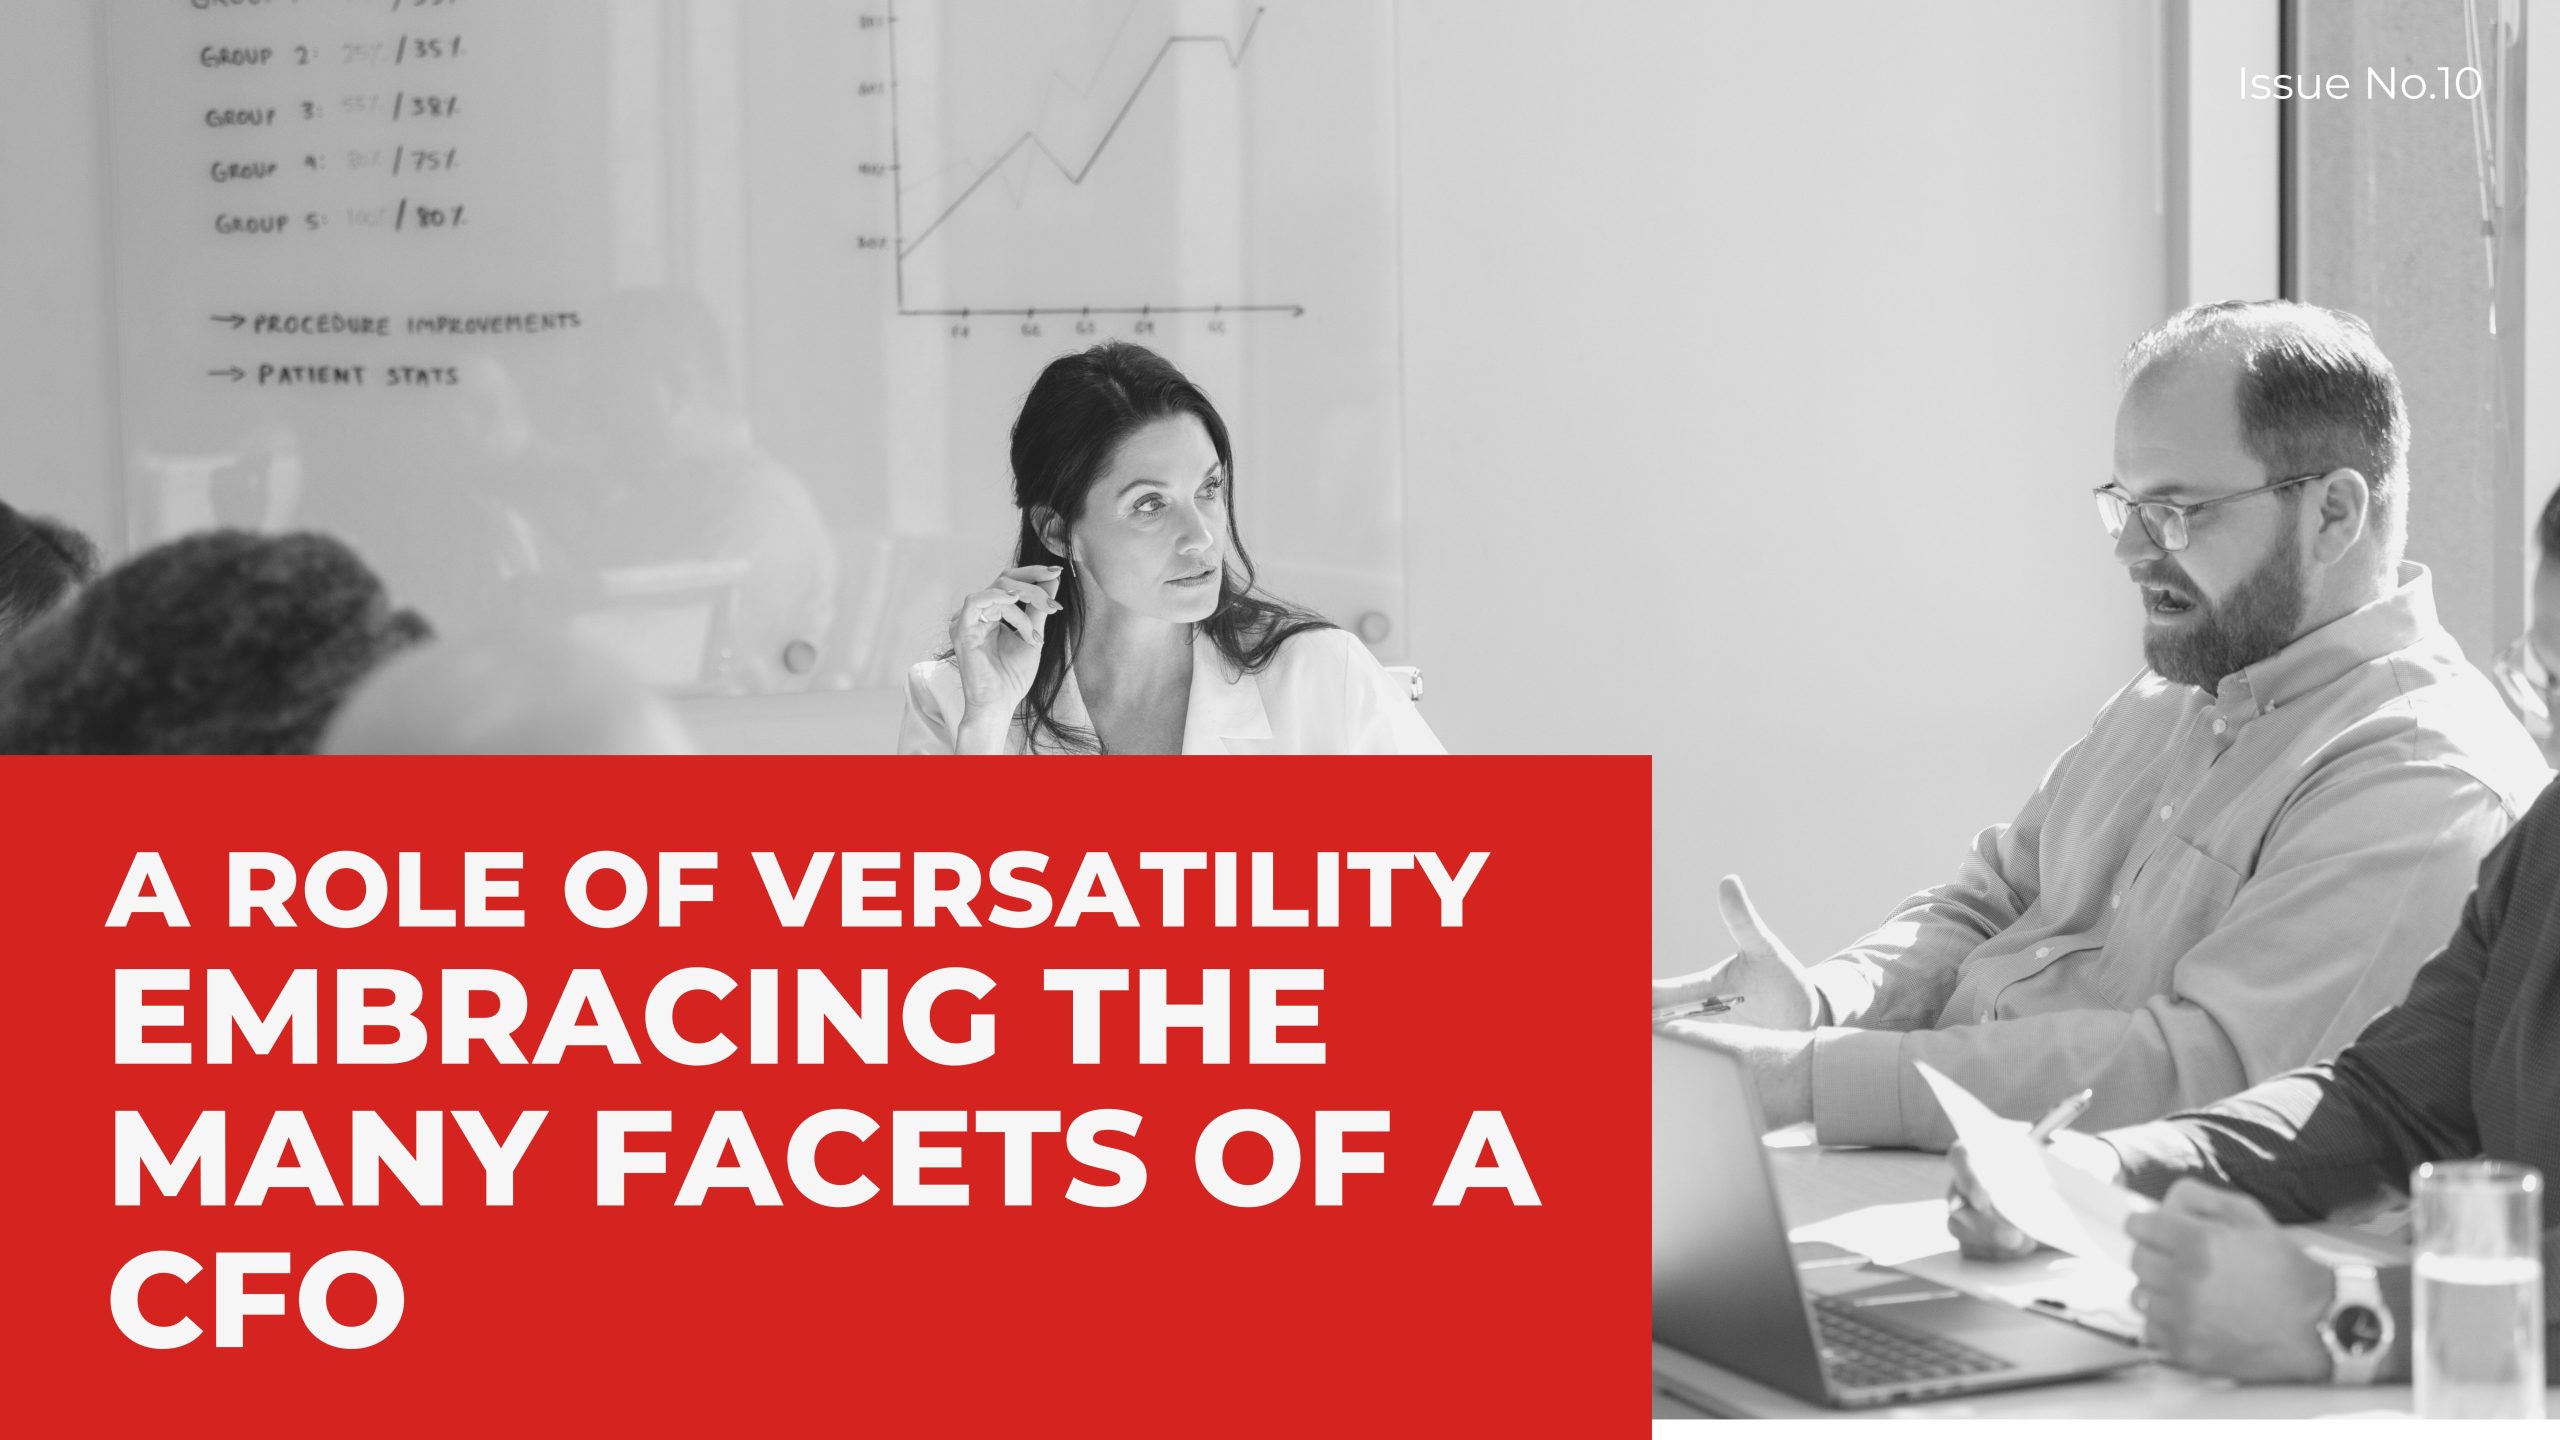 You are currently viewing A ROLE OF VERSATILITY: EMBRACING THE MANY FACETS OF A CFO